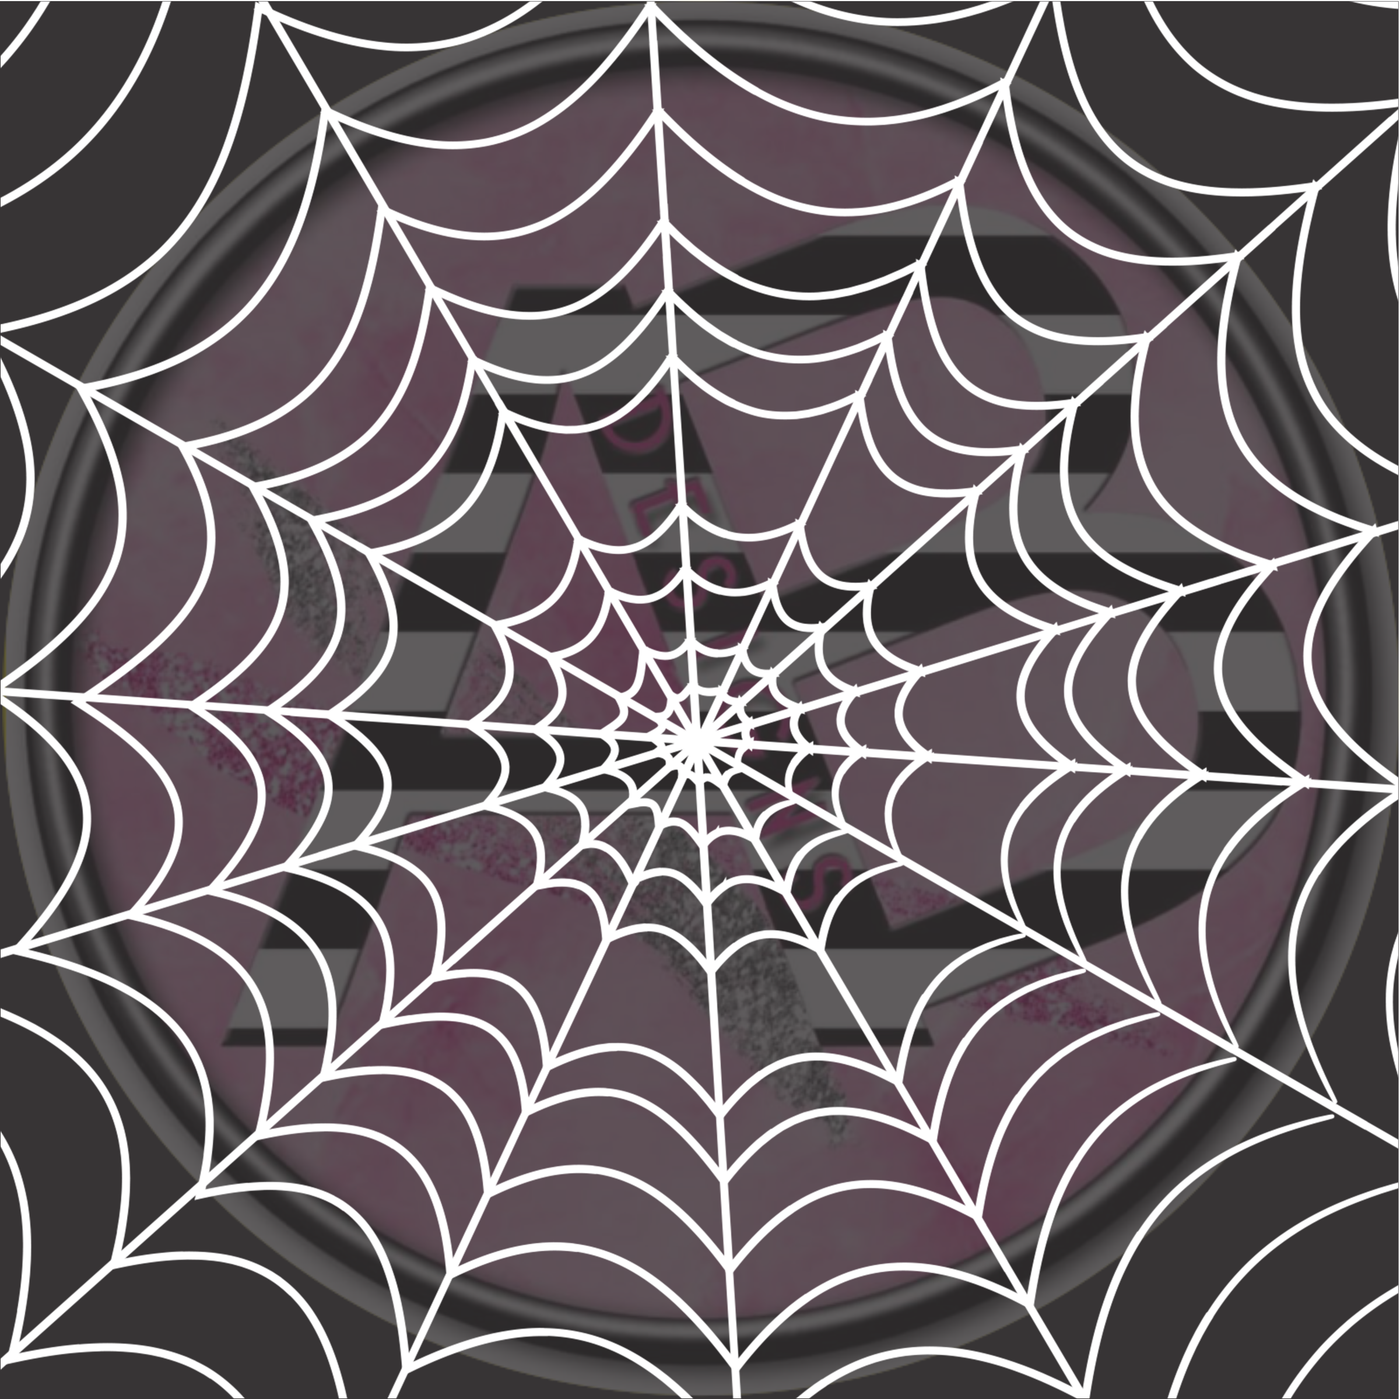 Adhesive Patterned Vinyl - White Ink Spider Web 01